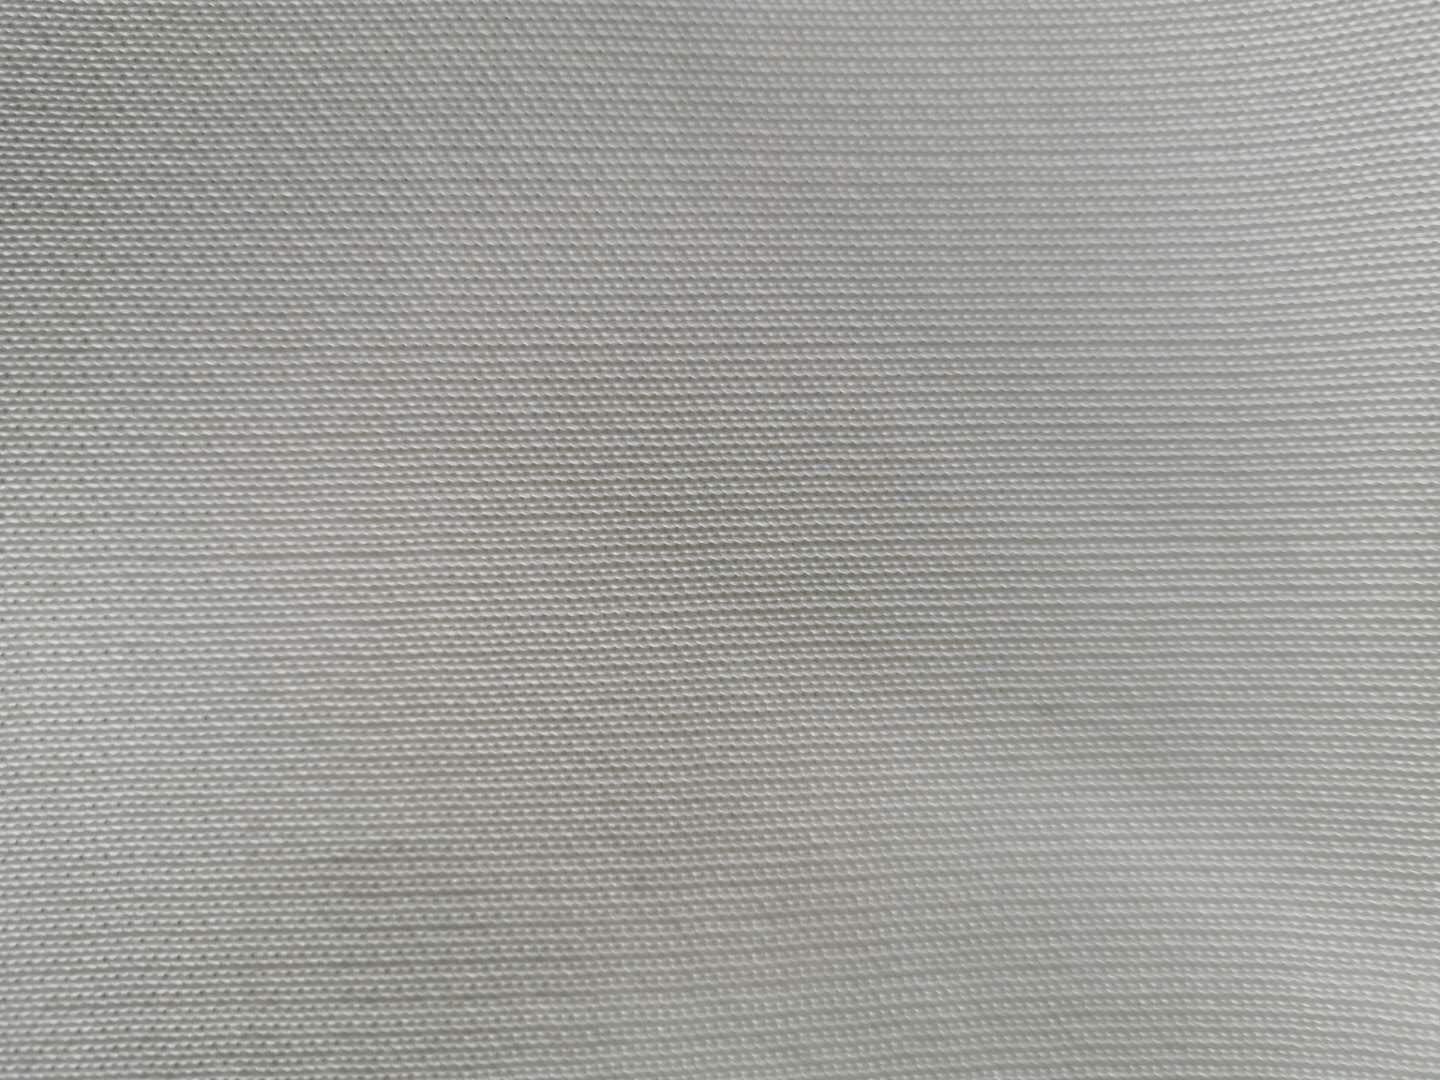 Knitted cut-proof class 4 fabric 4